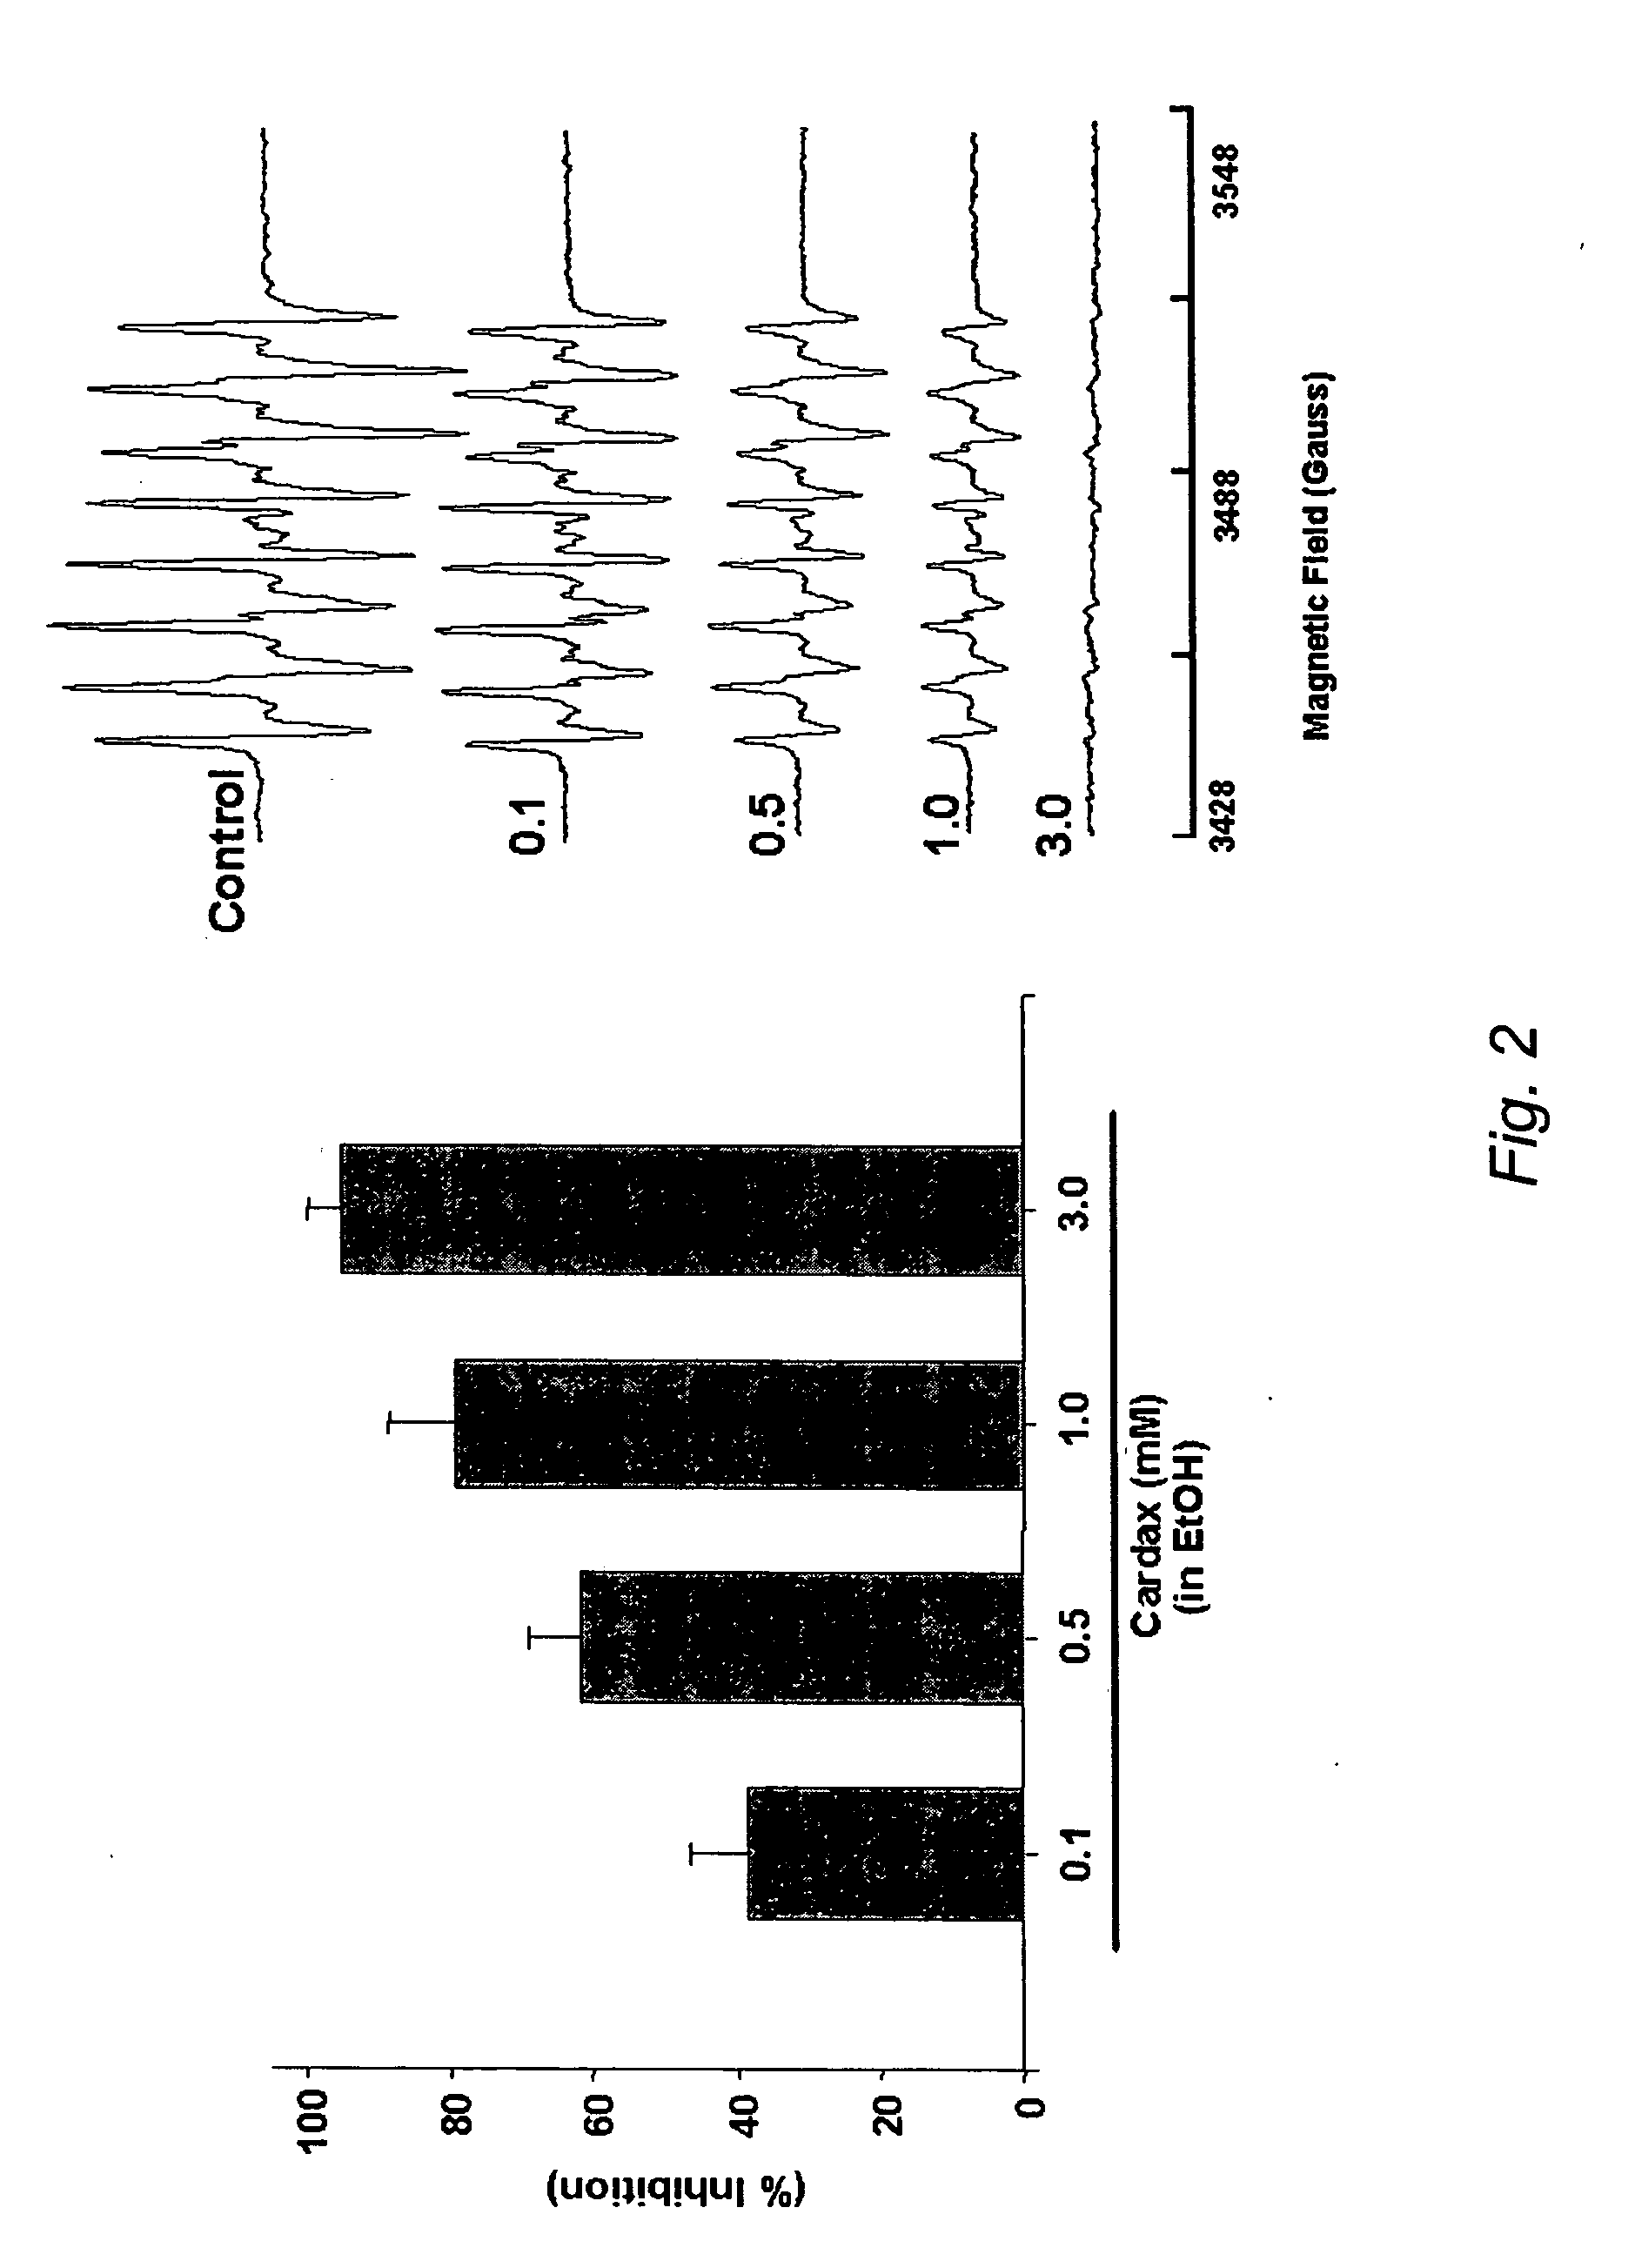 Carotenoid analogs or derivatives for the inhibition and amelioration of disease